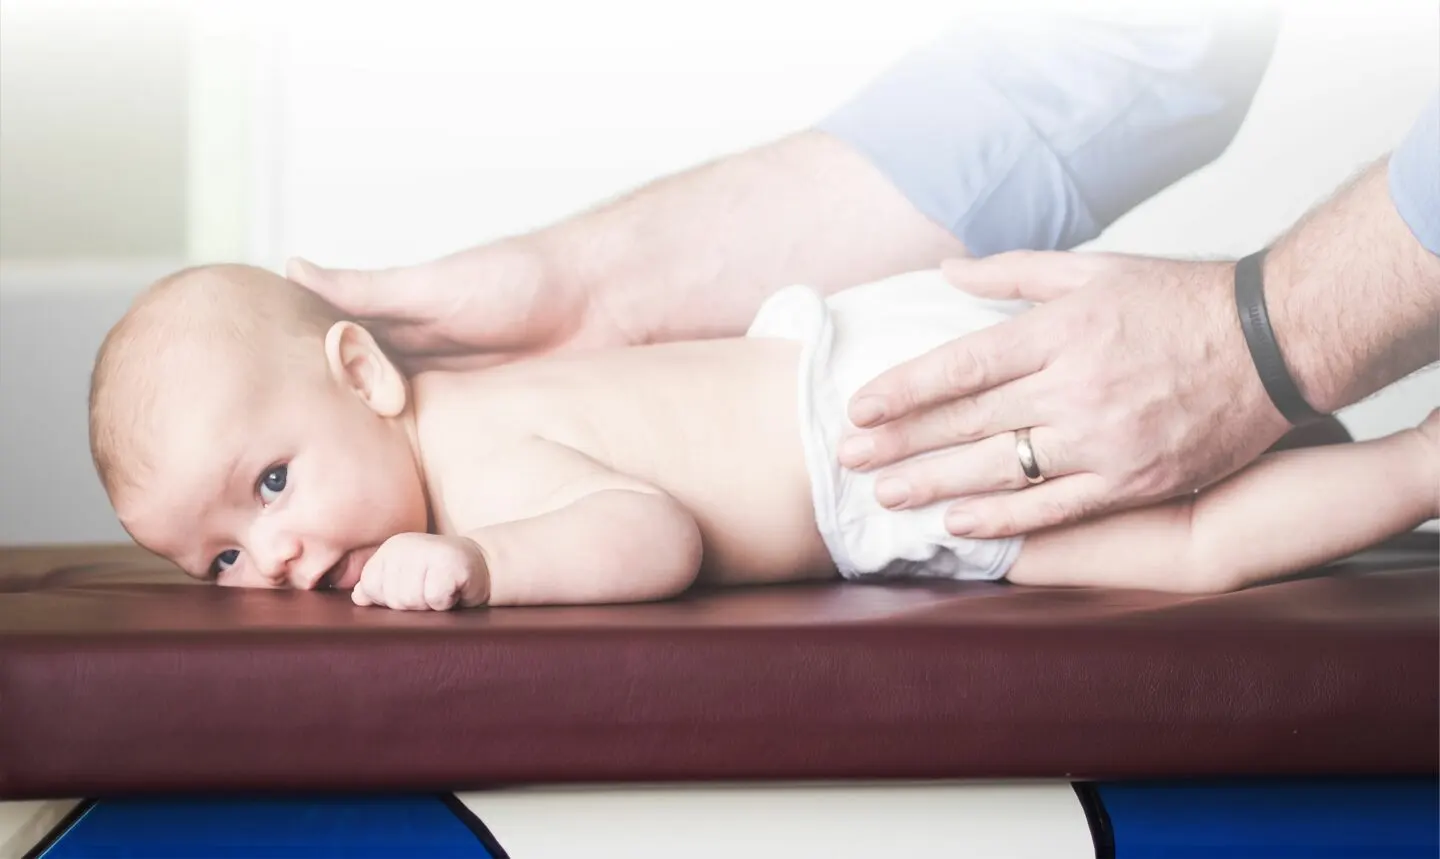 Best Chiropractor For Infants and Babies Near Me in Burien, WA.